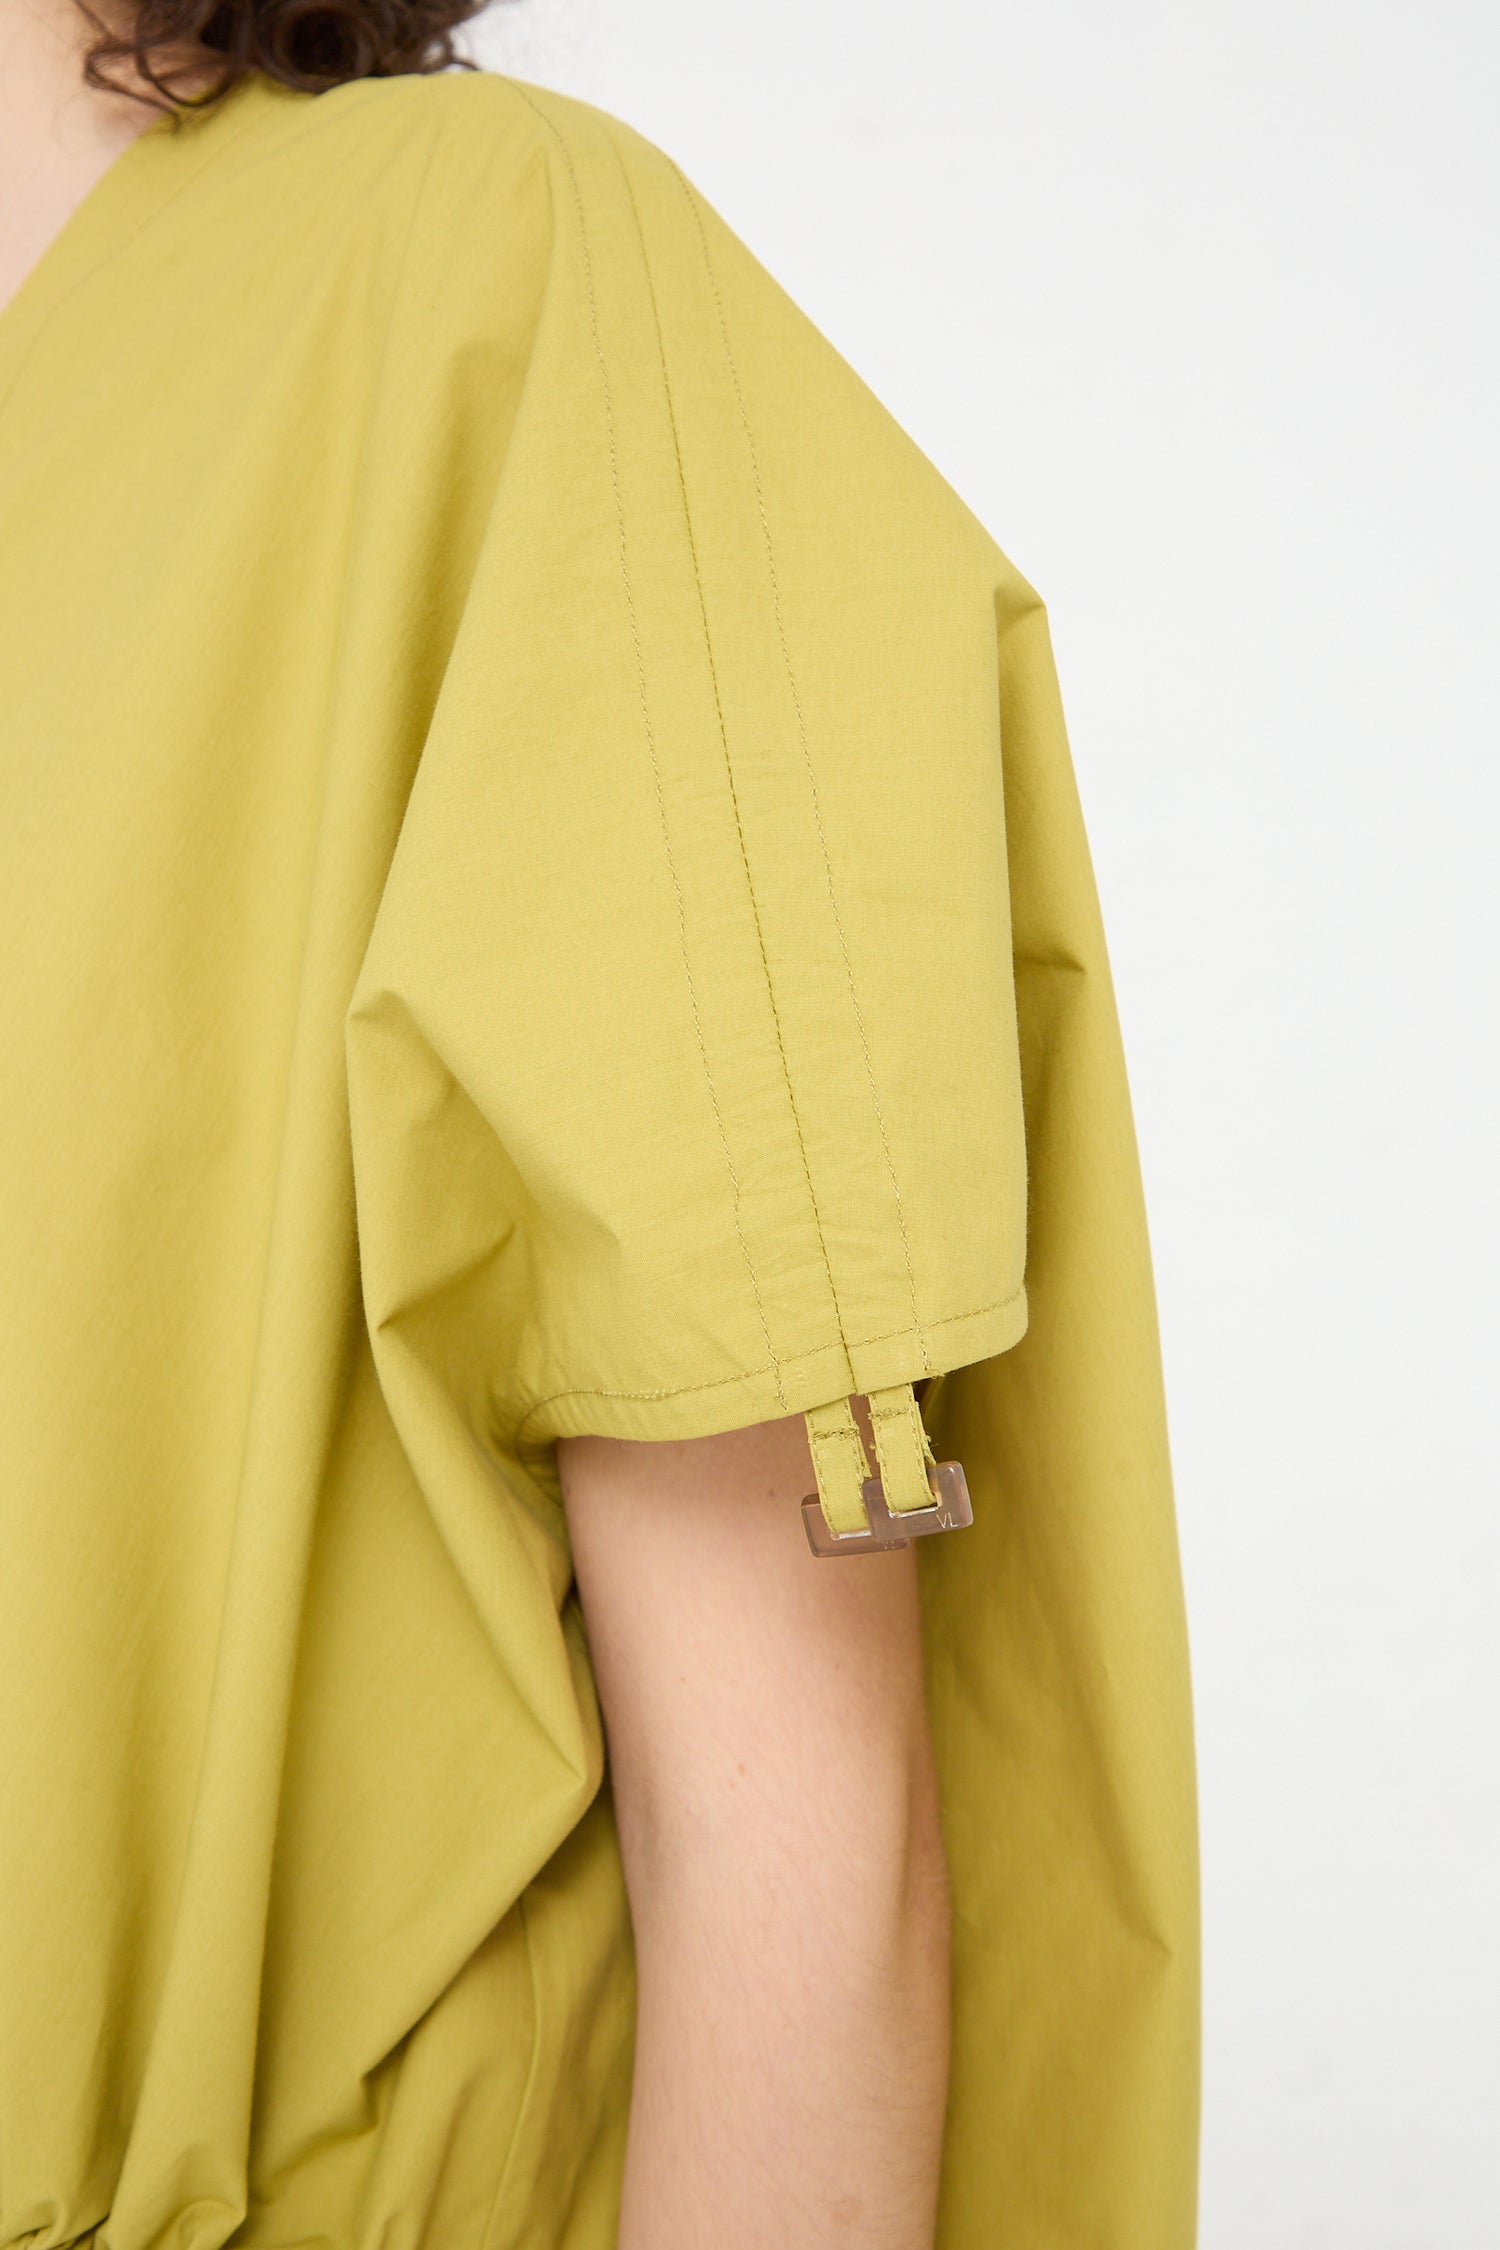 The side of a woman wearing an oversized yellow Veronique Leroy cotton poplin gathered dress in matcha.